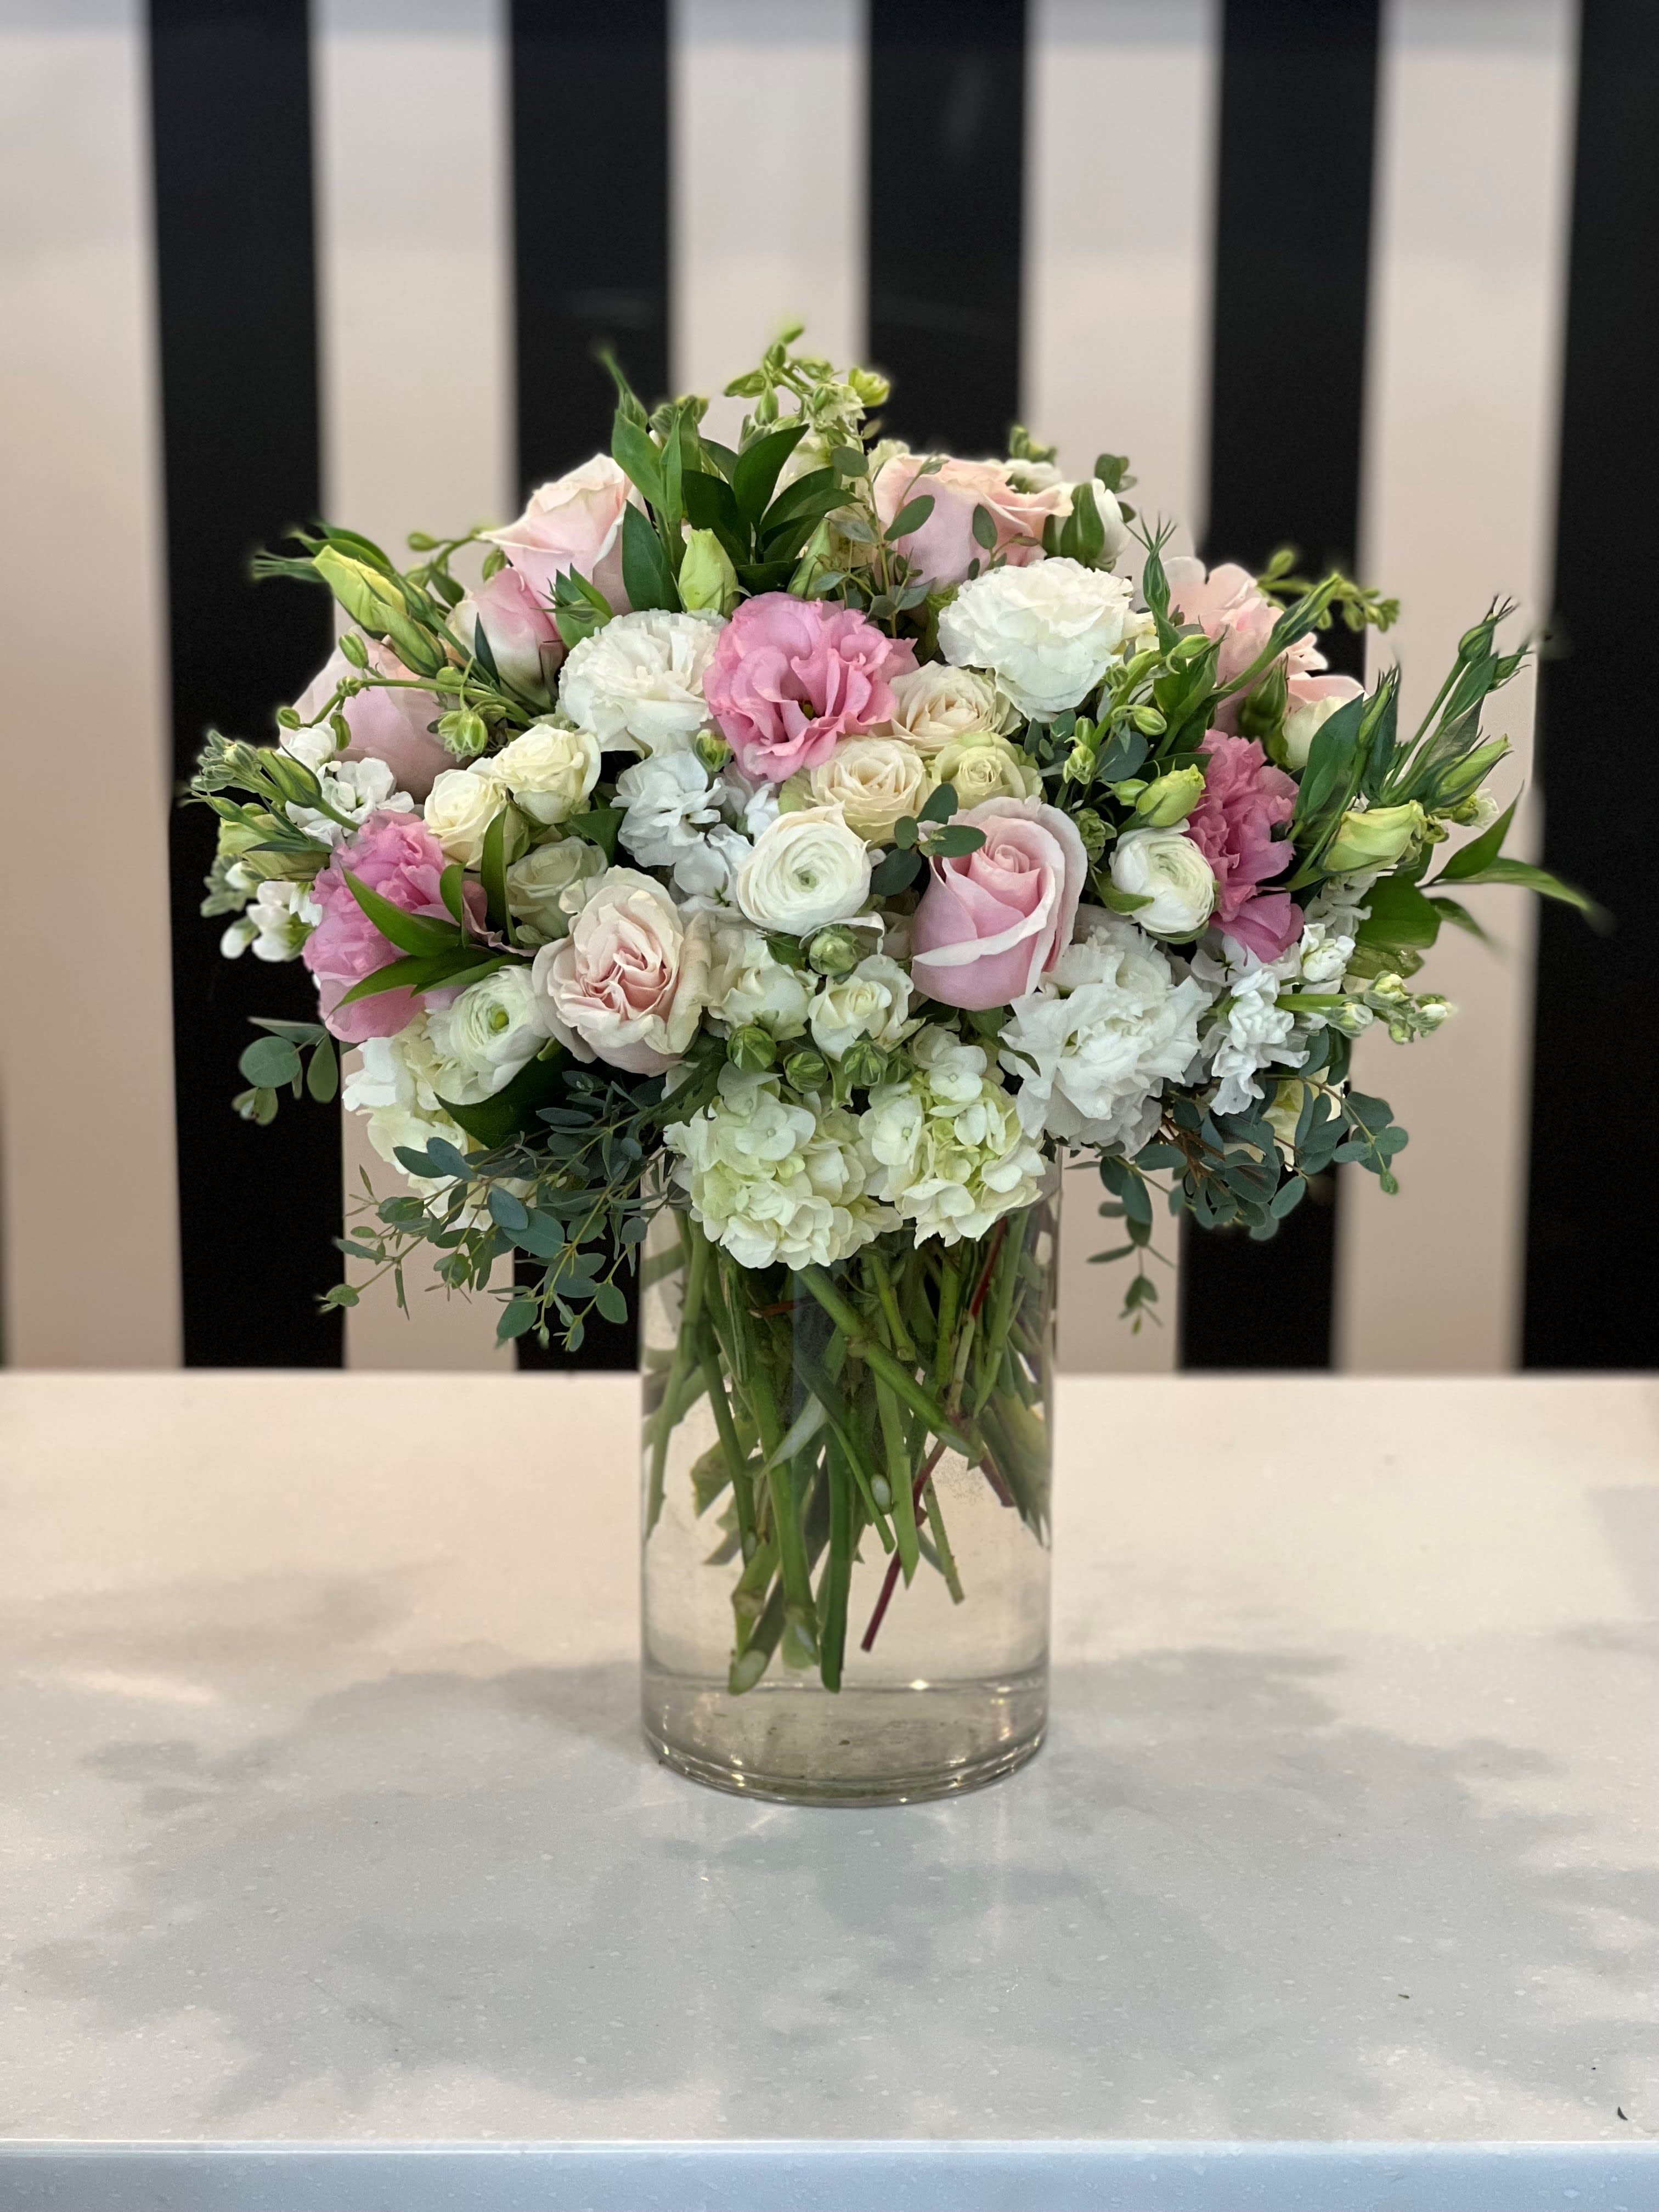 Glass Slipper  - Great for any occasion, this white crème and pink arrangement makes the perfect gift. White hydrangea, pink roses, white lisianthus and ranunculus with beautiful greenery. 